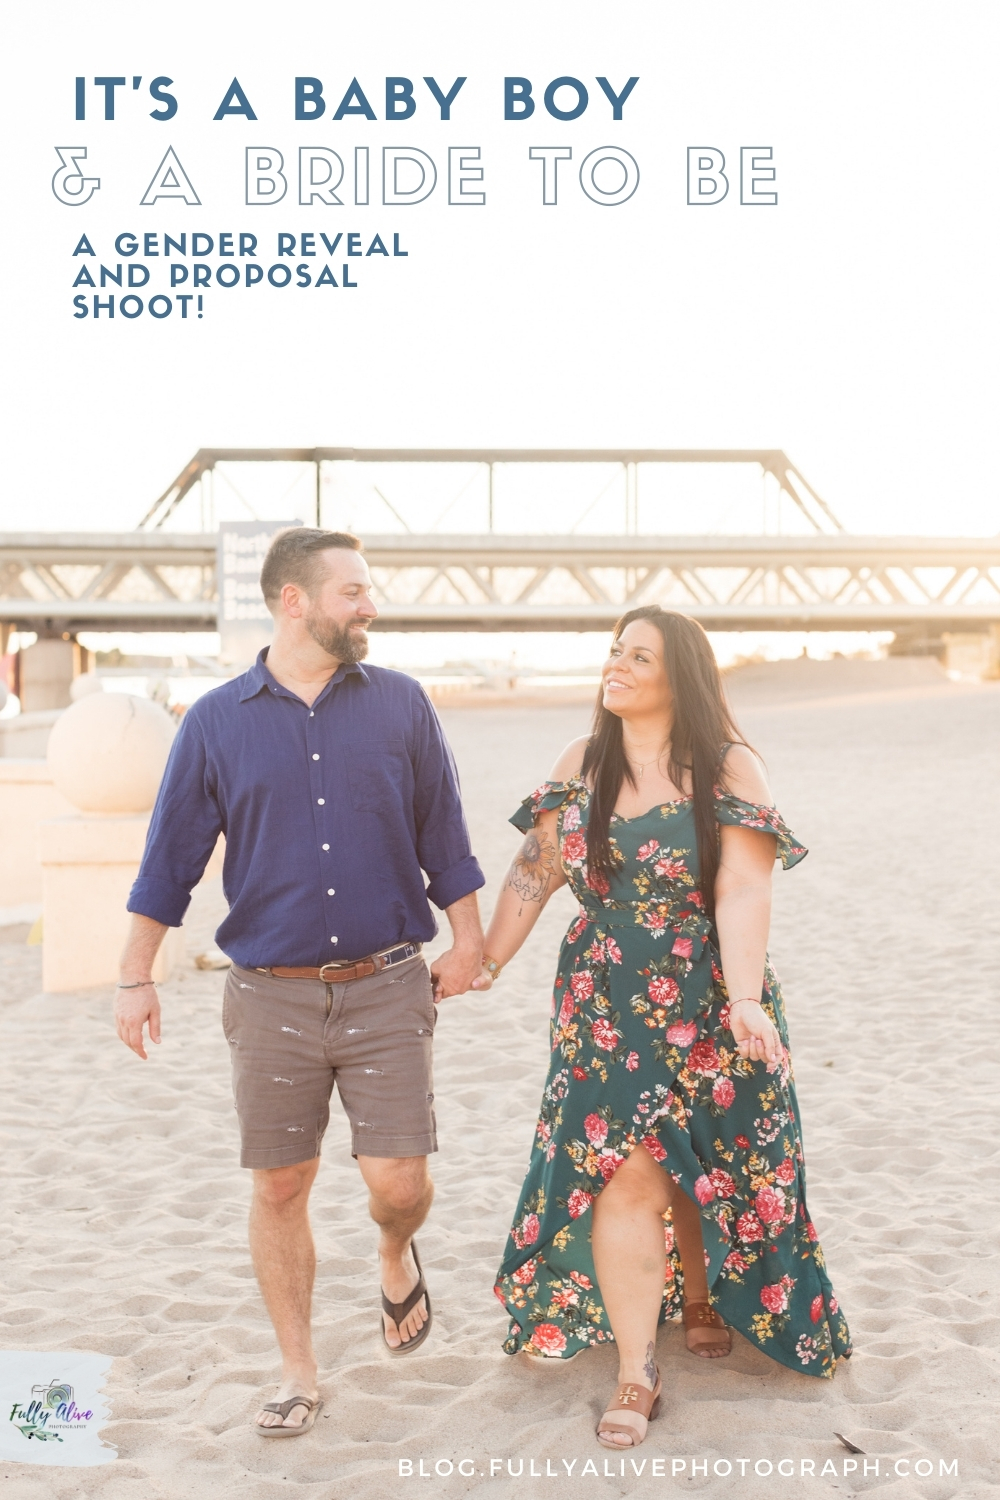 It's A baby BOY and bride to be reveal and proposal shoot